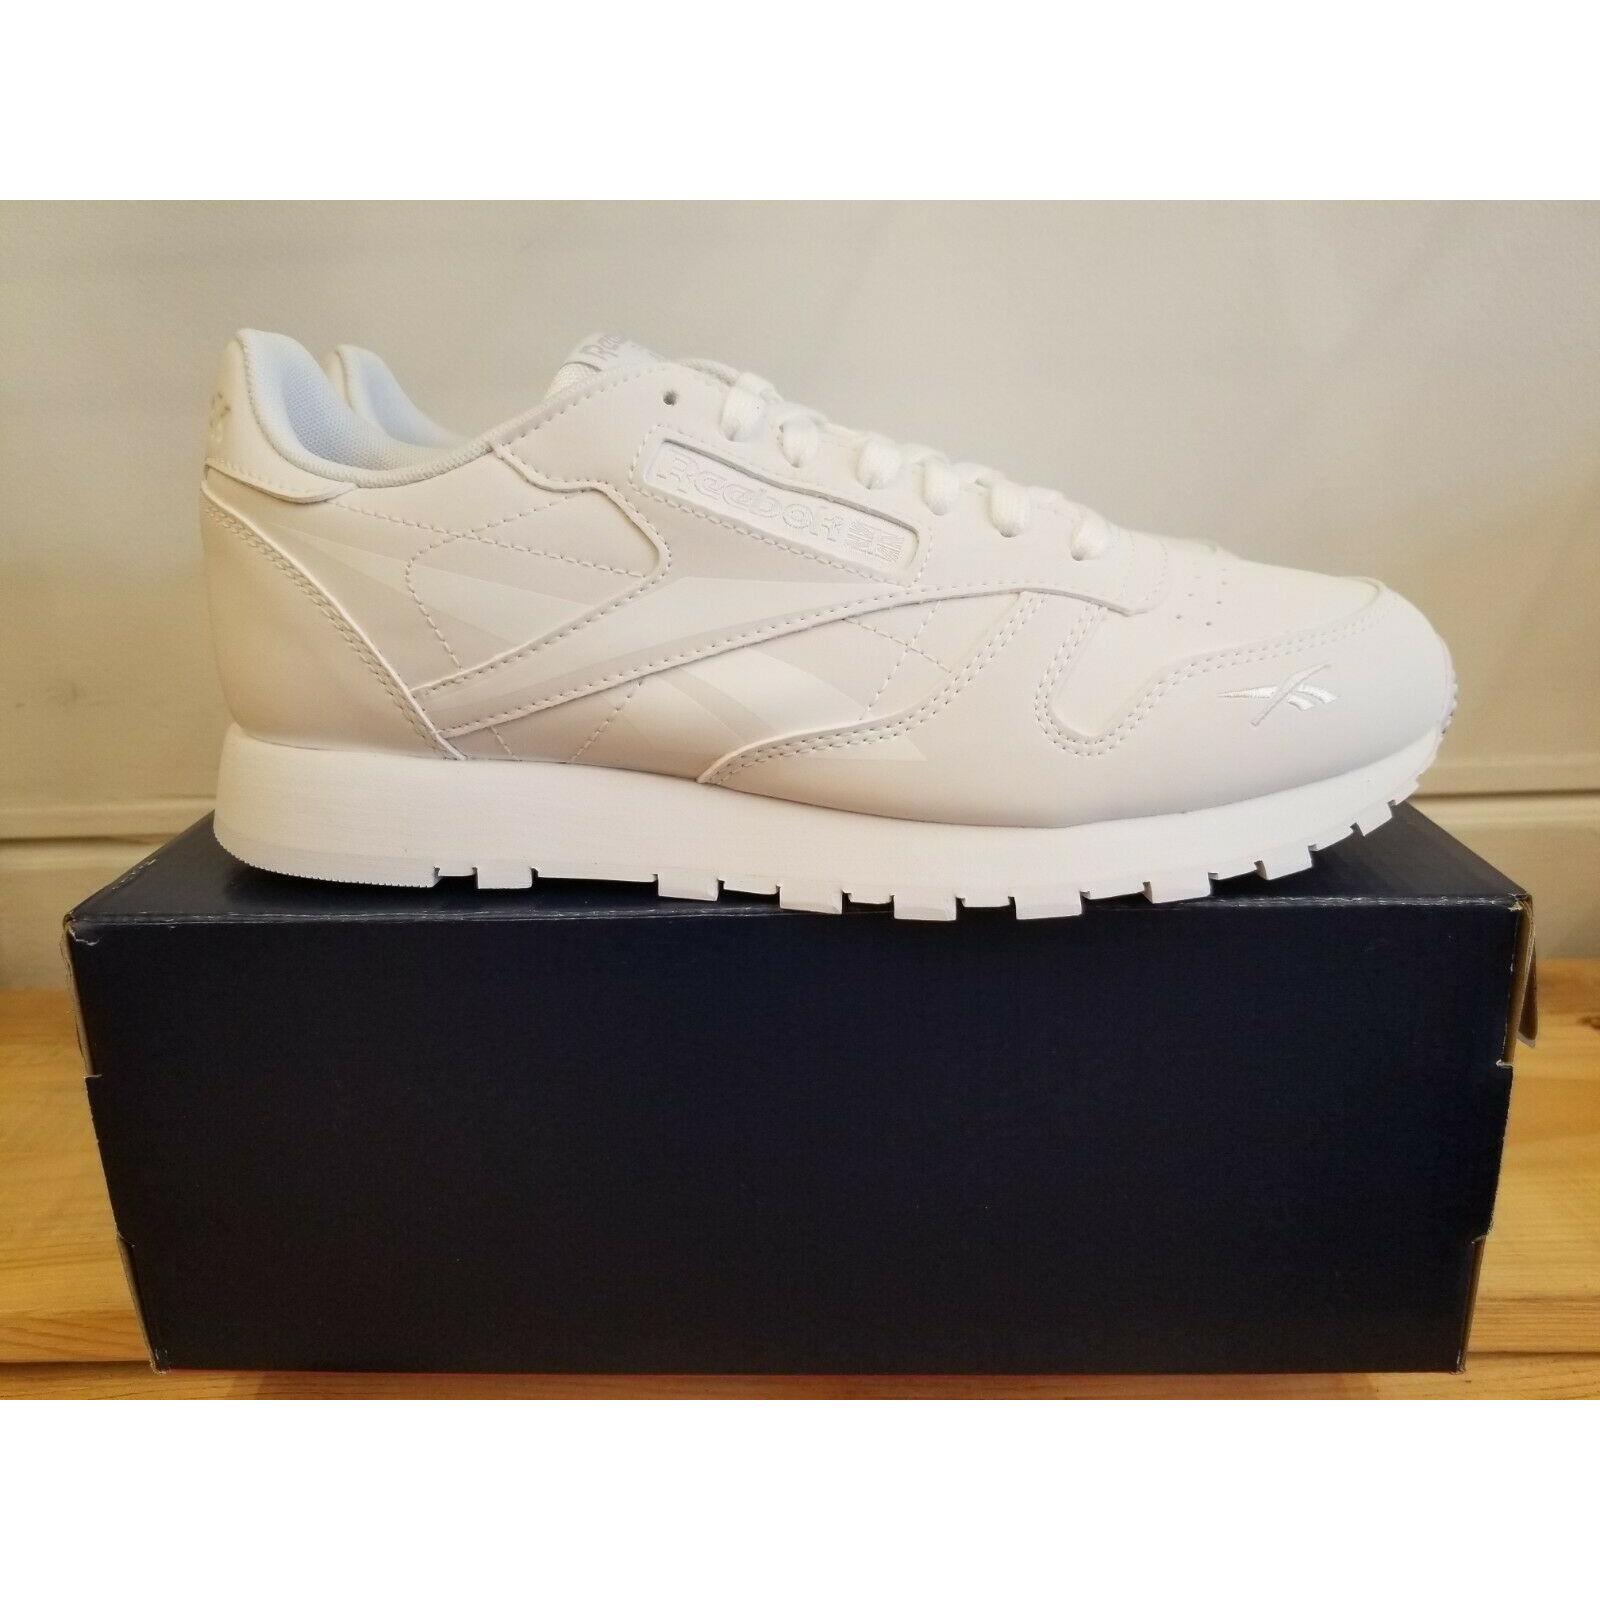 IN The Box Reebok Classic Leather White FV2107 Shoes For Men